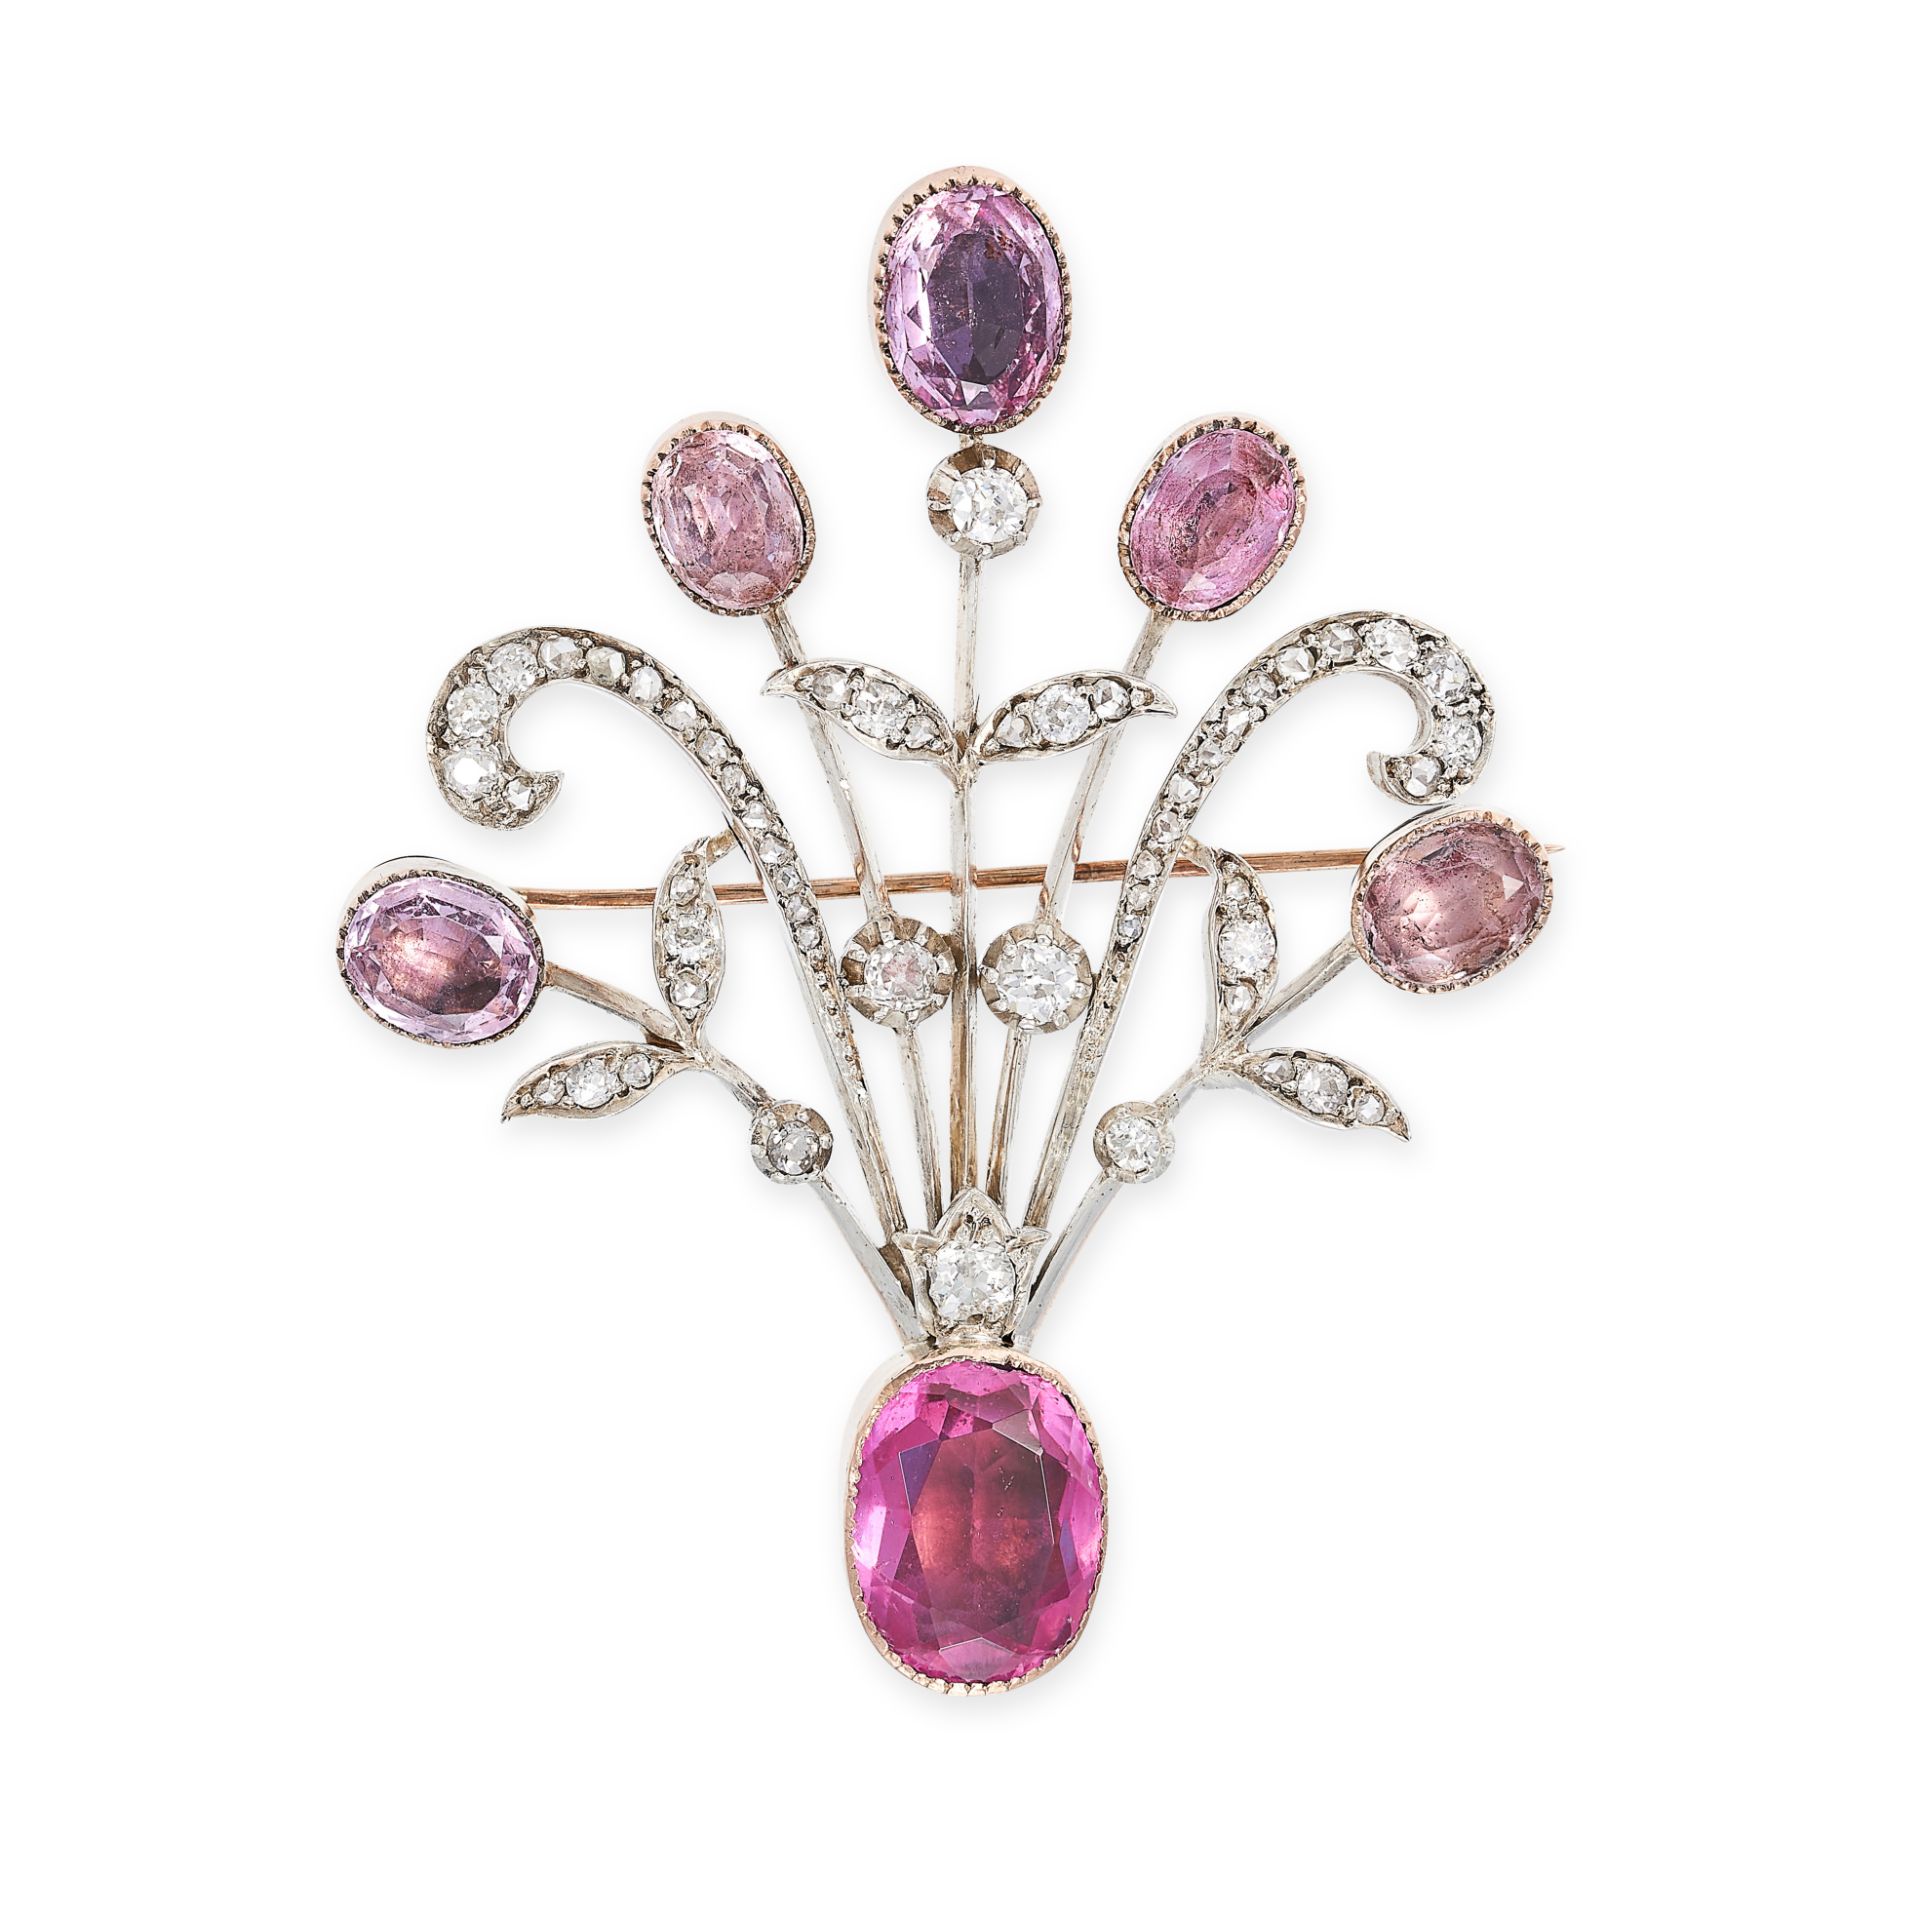 AN ANTIQUE PINK TOPAZ AND DIAMOND BROOCH / PENDANT in yellow gold and silver, designed as spray of